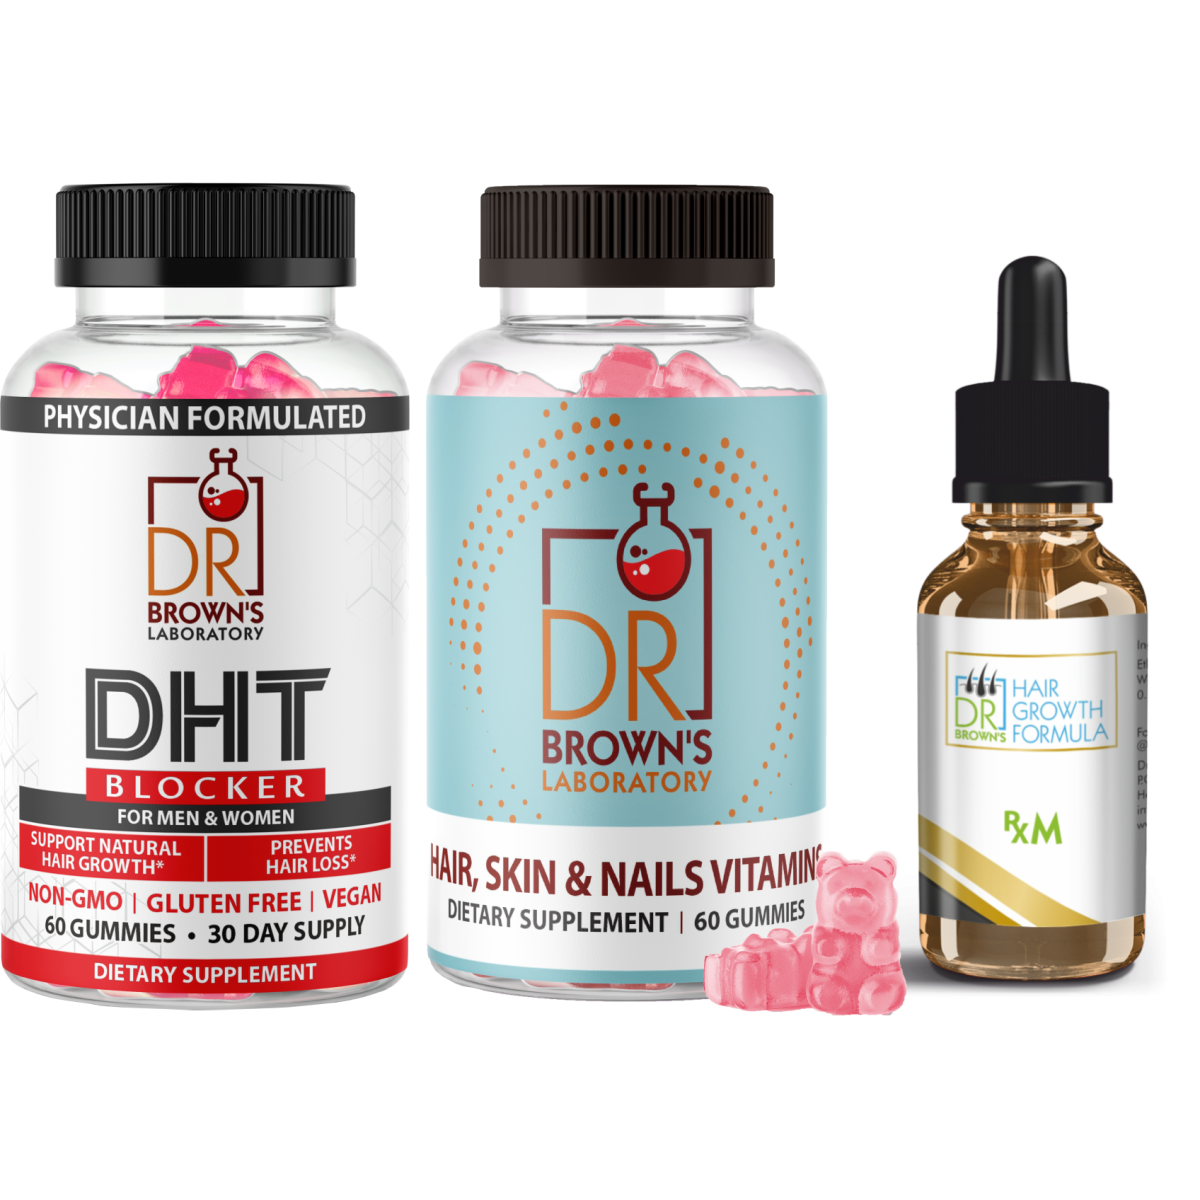 Hair Growth Combo with Rx M  